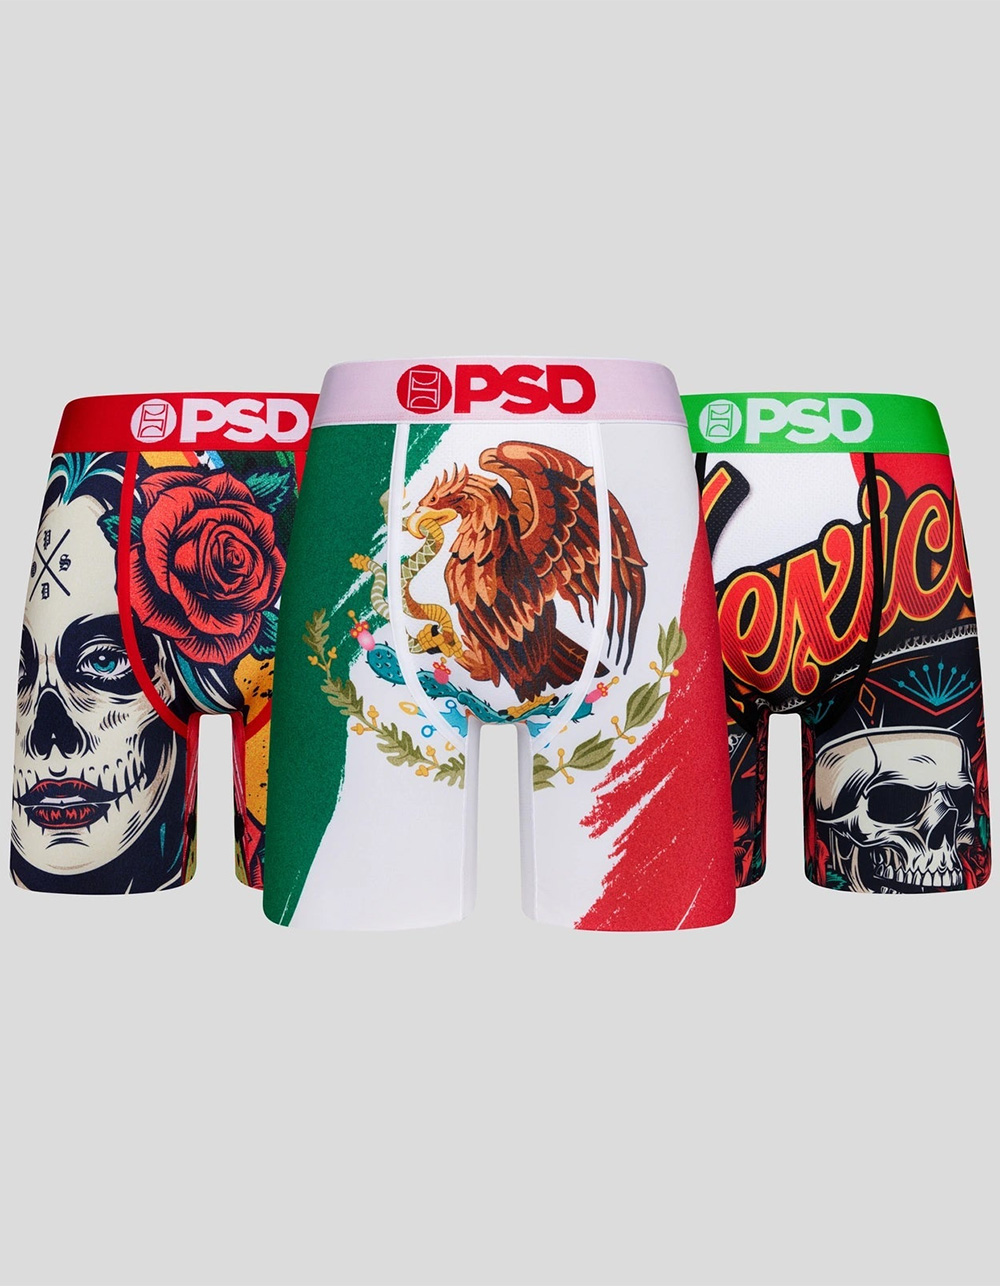 PSD Playboy Boxer Brief  Urban Outfitters Mexico - Clothing, Music, Home &  Accessories